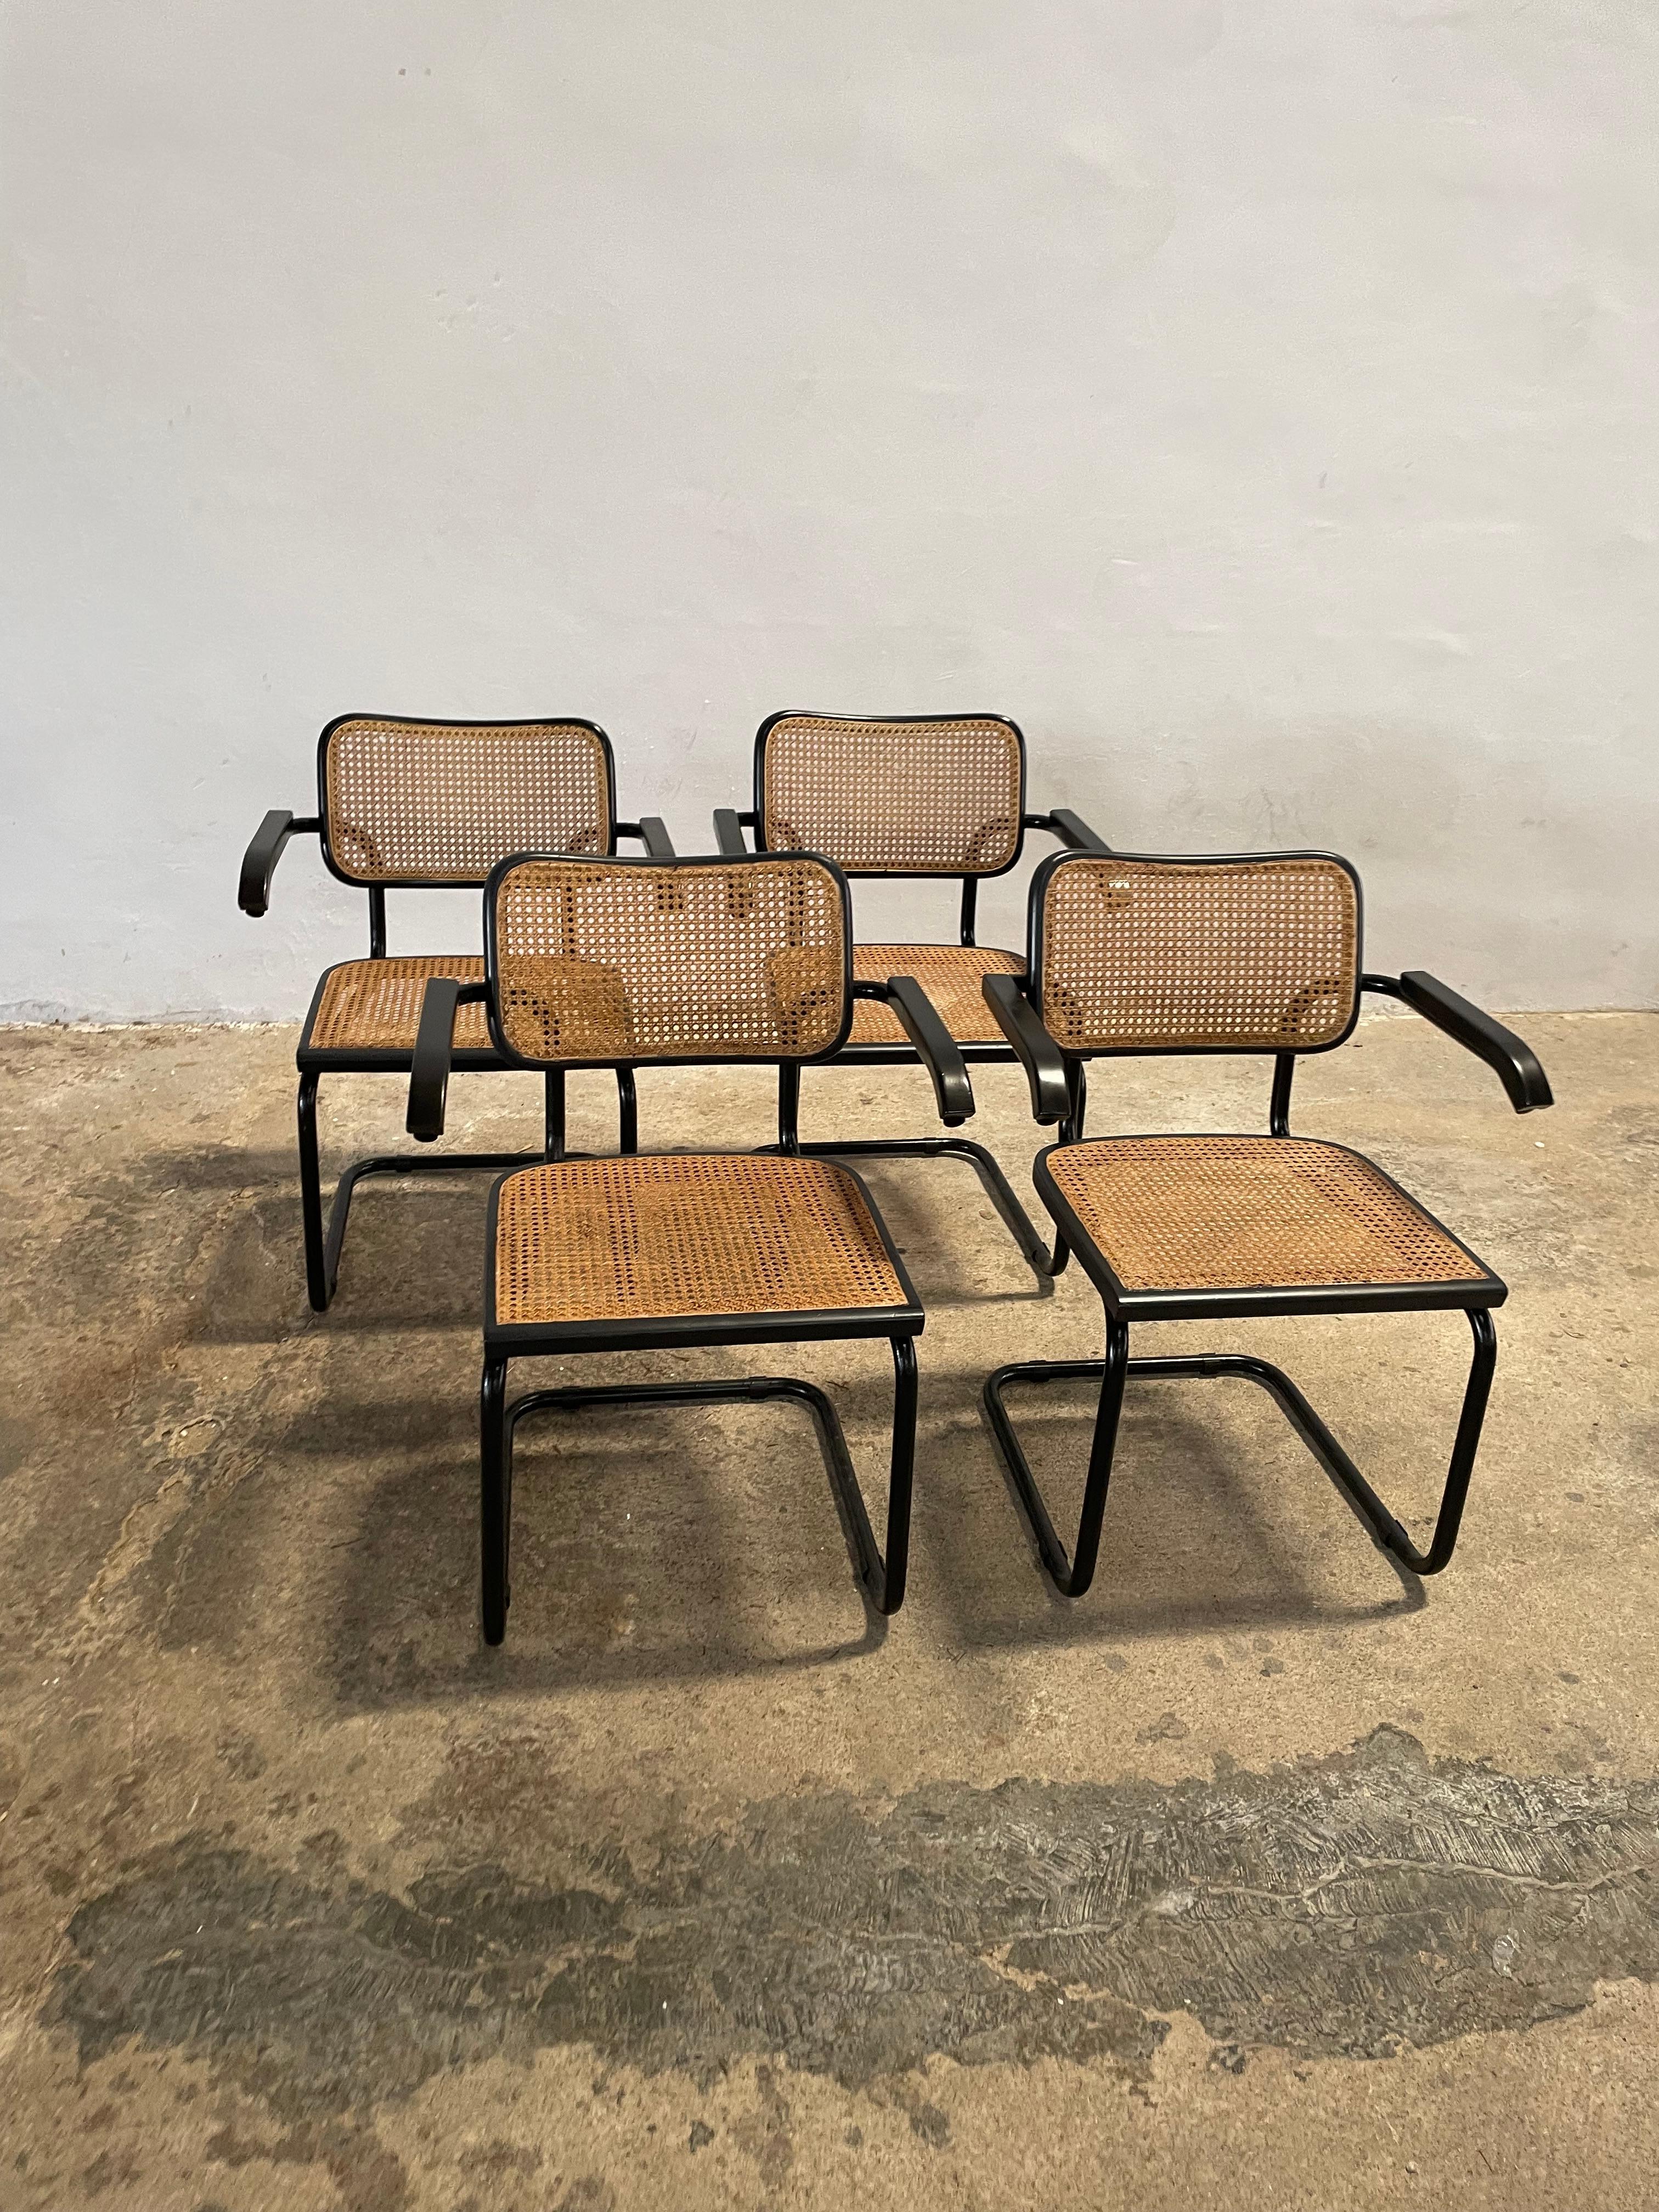 Set of four (4) rare all black Cesca chairs, icon of the Bauhaus and designed in 1928, by Marcel Breuer. Black beech wood, black lacquered tubular structure. In good vintage condition, wear consistent with age and use

Offered here a Set of 4x B64